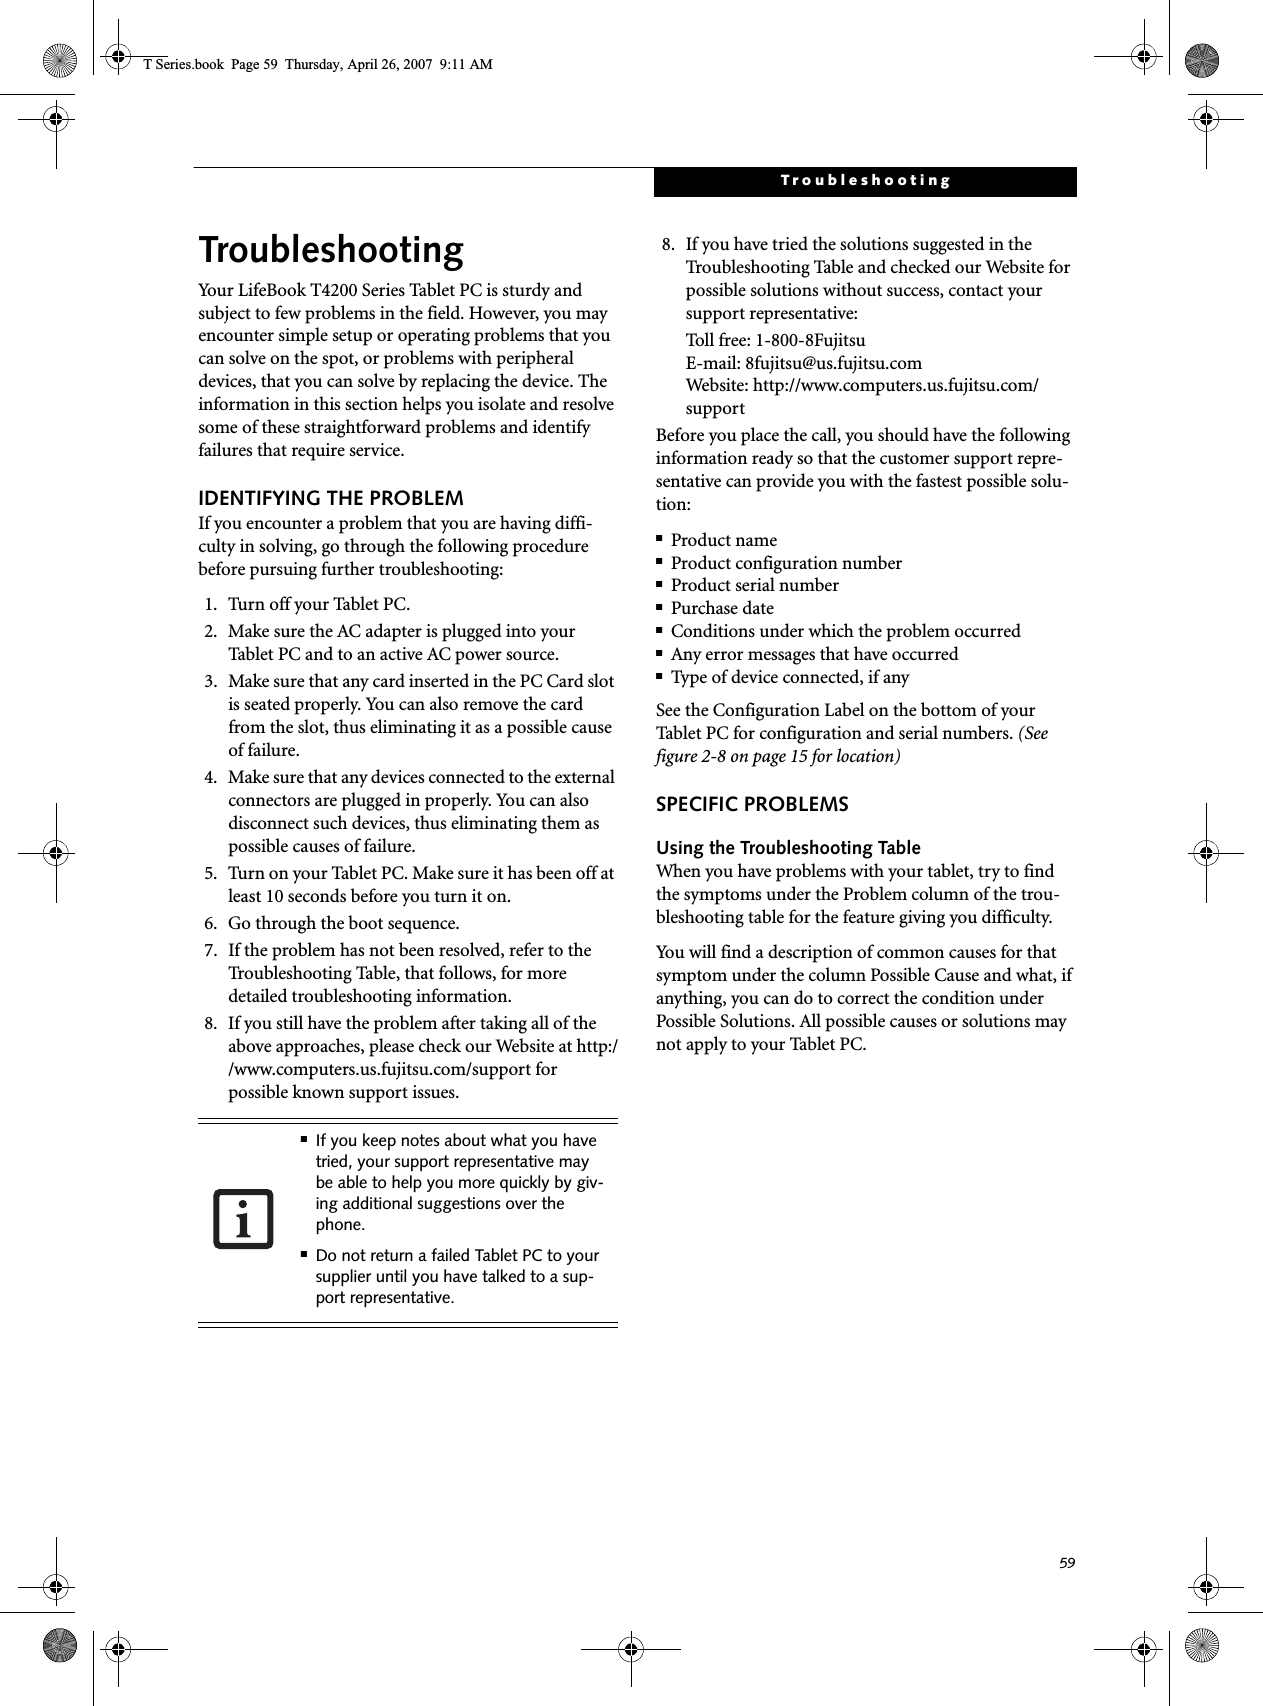 59TroubleshootingTroubleshootingYour LifeBook T4200 Series Tablet PC is sturdy and subject to few problems in the field. However, you may encounter simple setup or operating problems that you can solve on the spot, or problems with peripheral devices, that you can solve by replacing the device. The information in this section helps you isolate and resolve some of these straightforward problems and identify failures that require service.IDENTIFYING THE PROBLEMIf you encounter a problem that you are having diffi-culty in solving, go through the following procedure before pursuing further troubleshooting:1. Turn off your Tablet PC.2. Make sure the AC adapter is plugged into your Tablet PC and to an active AC power source.3. Make sure that any card inserted in the PC Card slot is seated properly. You can also remove the card from the slot, thus eliminating it as a possible cause of failure.4. Make sure that any devices connected to the external connectors are plugged in properly. You can also disconnect such devices, thus eliminating them as possible causes of failure.5. Turn on your Tablet PC. Make sure it has been off at least 10 seconds before you turn it on.6. Go through the boot sequence.7. If the problem has not been resolved, refer to the Troubleshooting Table, that follows, for more detailed troubleshooting information.8. If you still have the problem after taking all of the above approaches, please check our Website at http://www.computers.us.fujitsu.com/support for possible known support issues. 8. If you have tried the solutions suggested in the Troubleshooting Table and checked our Website for possible solutions without success, contact your support representative: Toll free: 1-800-8Fujitsu E-mail: 8fujitsu@us.fujitsu.comWebsite: http://www.computers.us.fujitsu.com/supportBefore you place the call, you should have the following information ready so that the customer support repre-sentative can provide you with the fastest possible solu-tion:■Product name■Product configuration number■Product serial number■Purchase date■Conditions under which the problem occurred■Any error messages that have occurred■Type of device connected, if anySee the Configuration Label on the bottom of yourTablet PC for configuration and serial numbers. (See figure 2-8 on page 15 for location)SPECIFIC PROBLEMSUsing the Troubleshooting TableWhen you have problems with your tablet, try to find the symptoms under the Problem column of the trou-bleshooting table for the feature giving you difficulty. You will find a description of common causes for that symptom under the column Possible Cause and what, if anything, you can do to correct the condition under Possible Solutions. All possible causes or solutions may not apply to your Tablet PC.■If you keep notes about what you have tried, your support representative may be able to help you more quickly by giv-ing additional suggestions over the phone.■Do not return a failed Tablet PC to your supplier until you have talked to a sup-port representative.T Series.book  Page 59  Thursday, April 26, 2007  9:11 AM